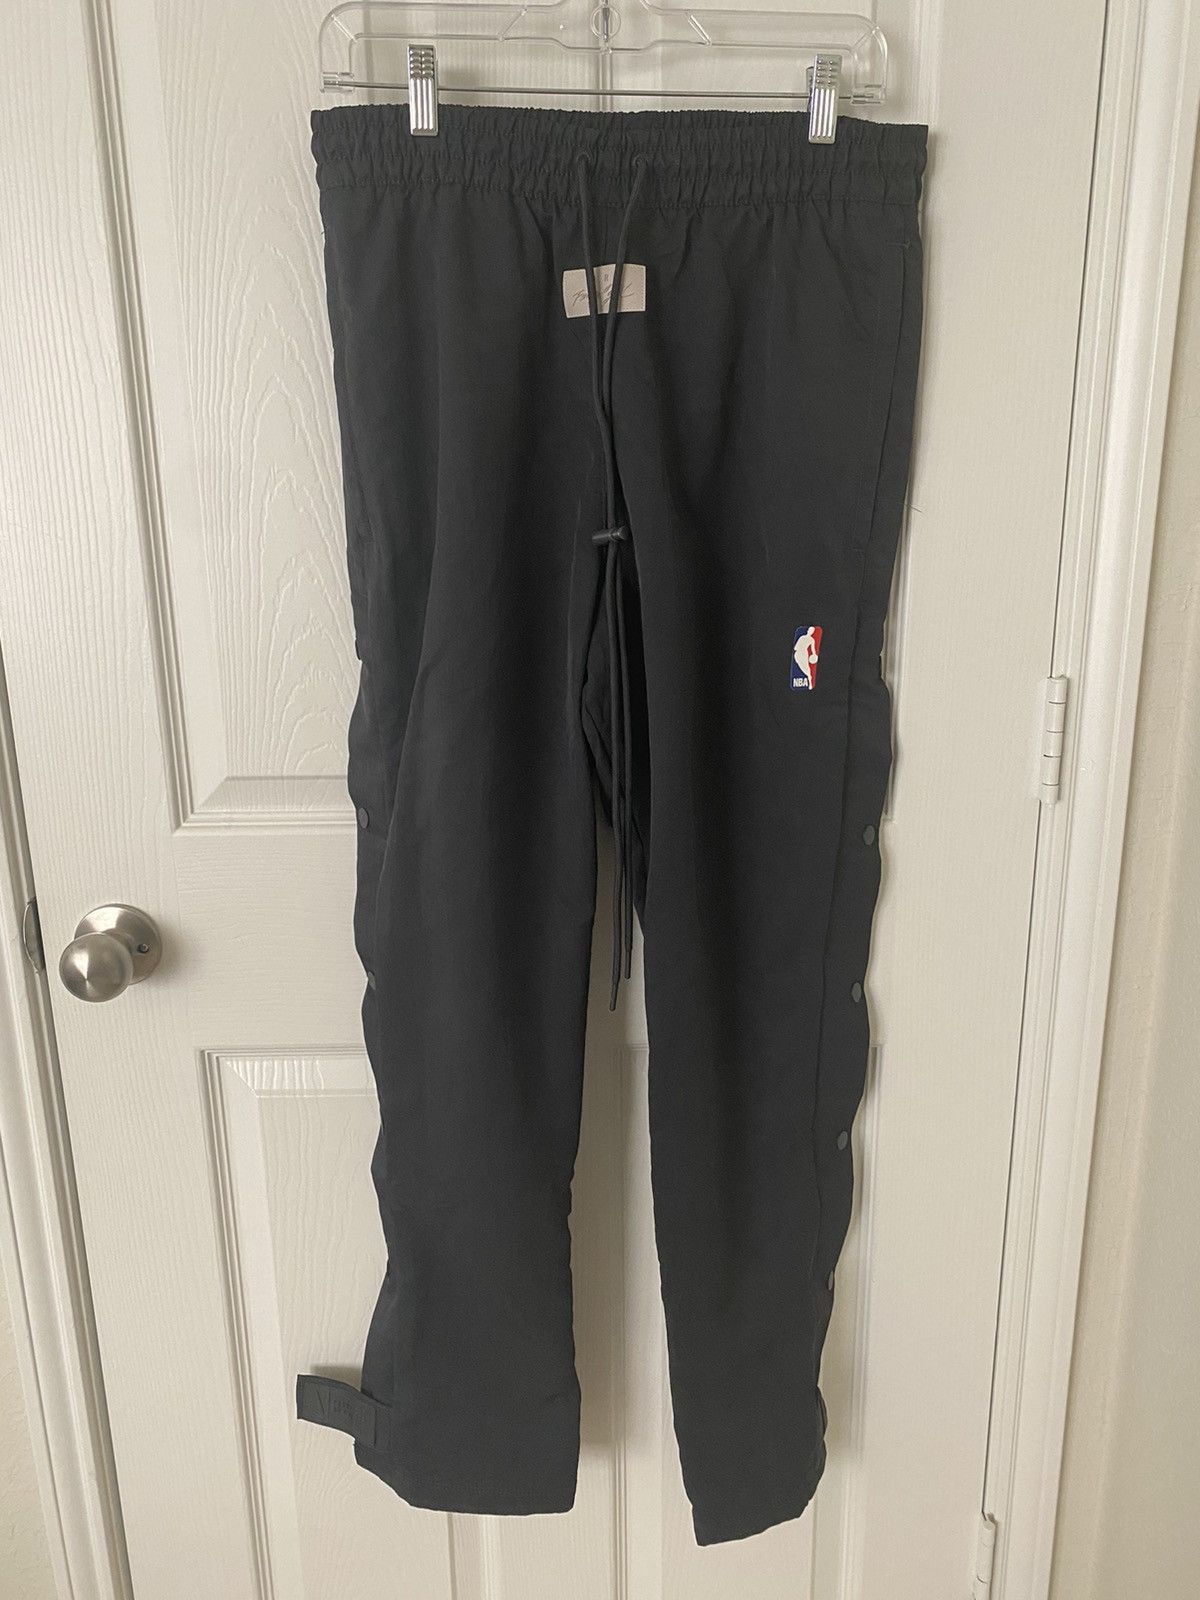 Nike x Fear of God Warm Up Pants - Size Small